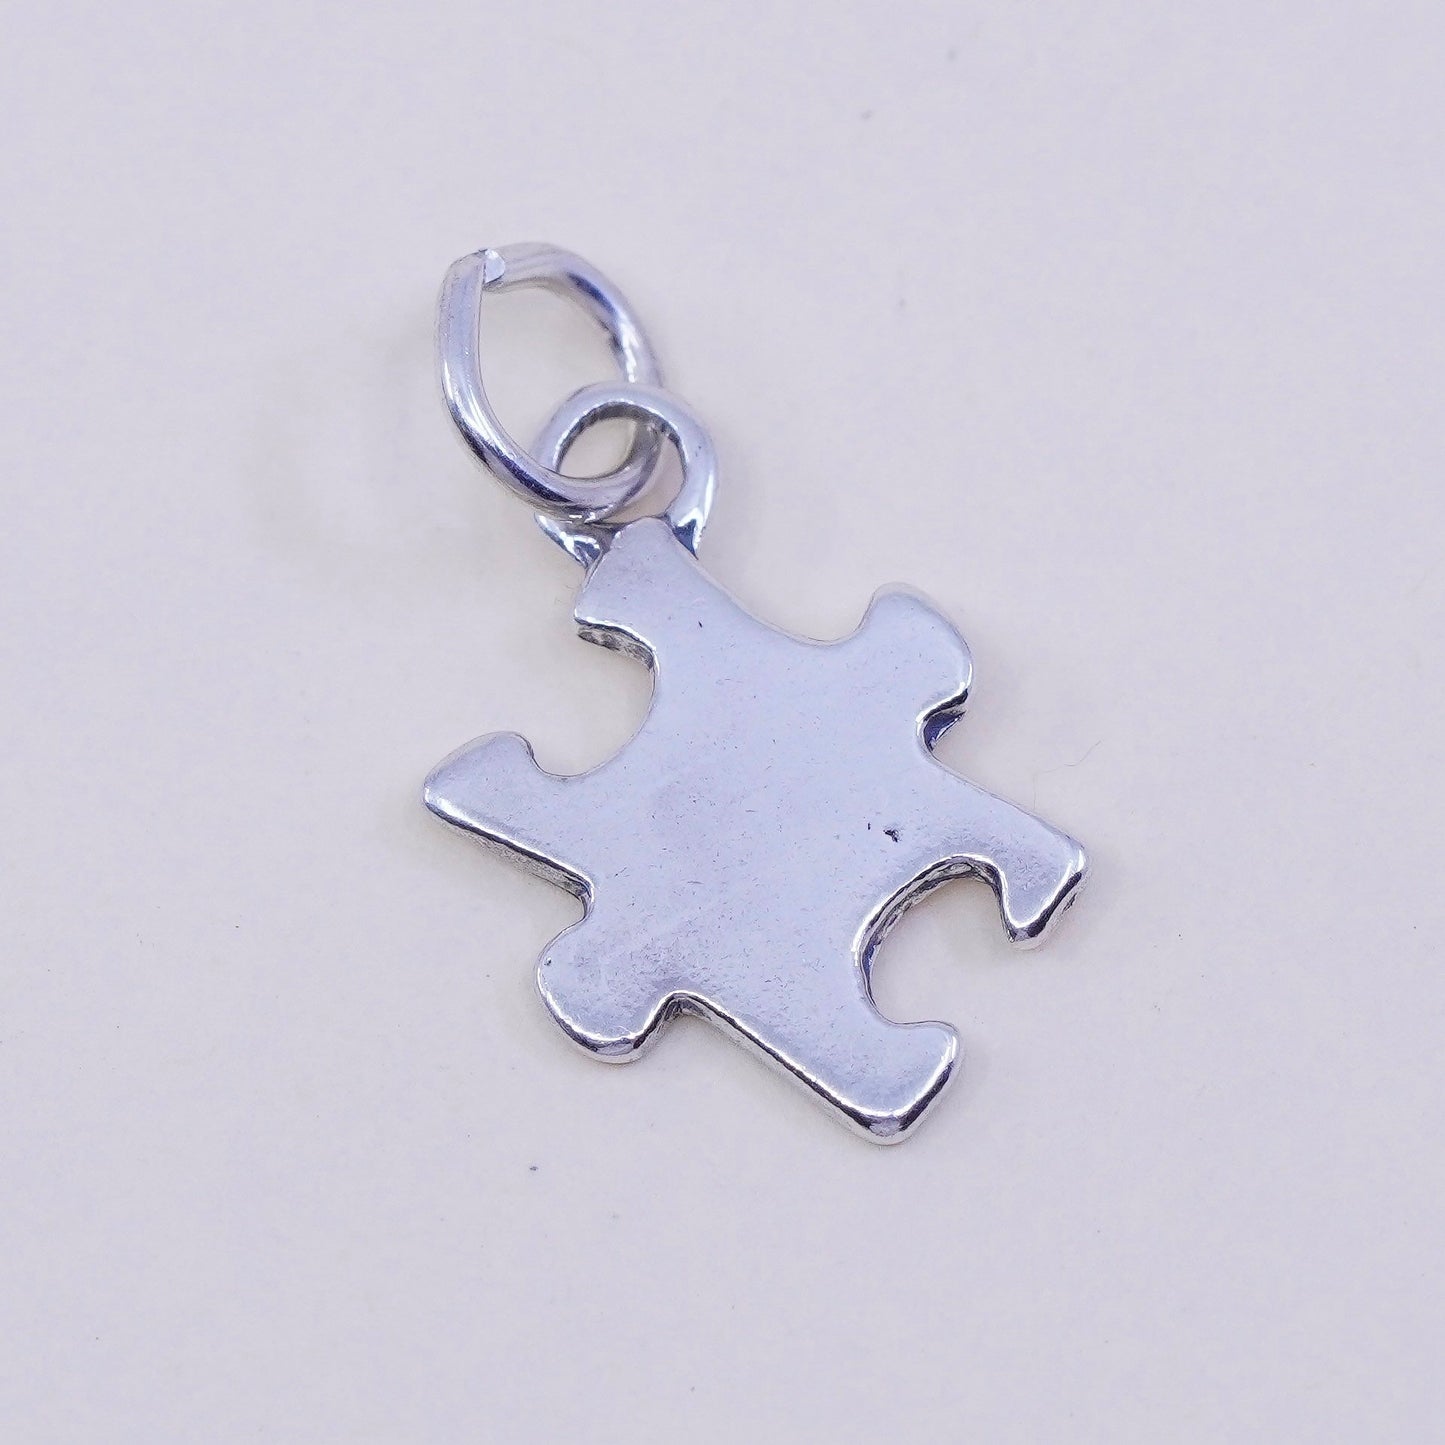 Vintage 925 sterling silver handmade puzzle charm, stamped 925